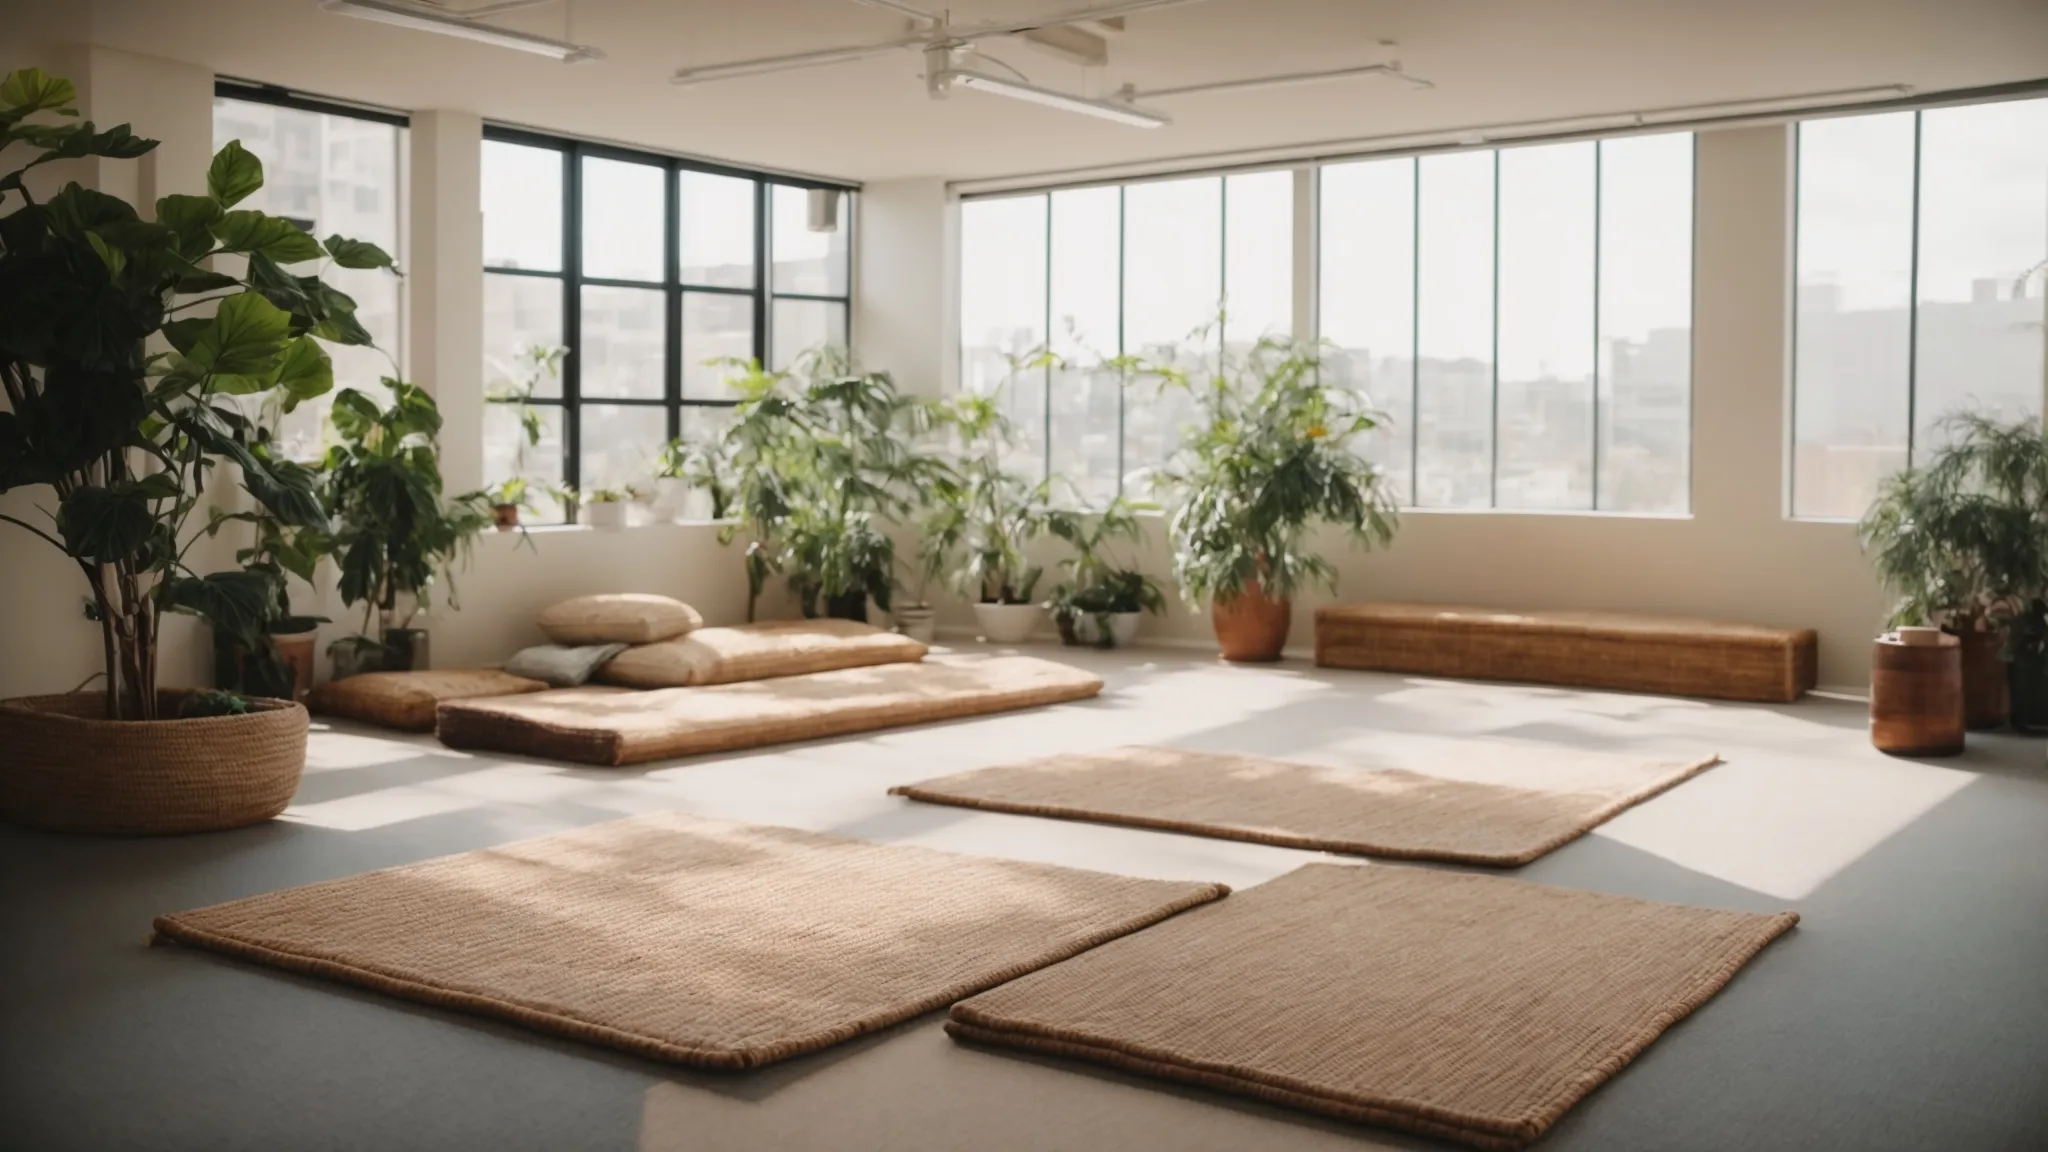 a tranquil office space turned into a meditation room with mats on the floor, soft lighting, and plants, where employees gather in silence.